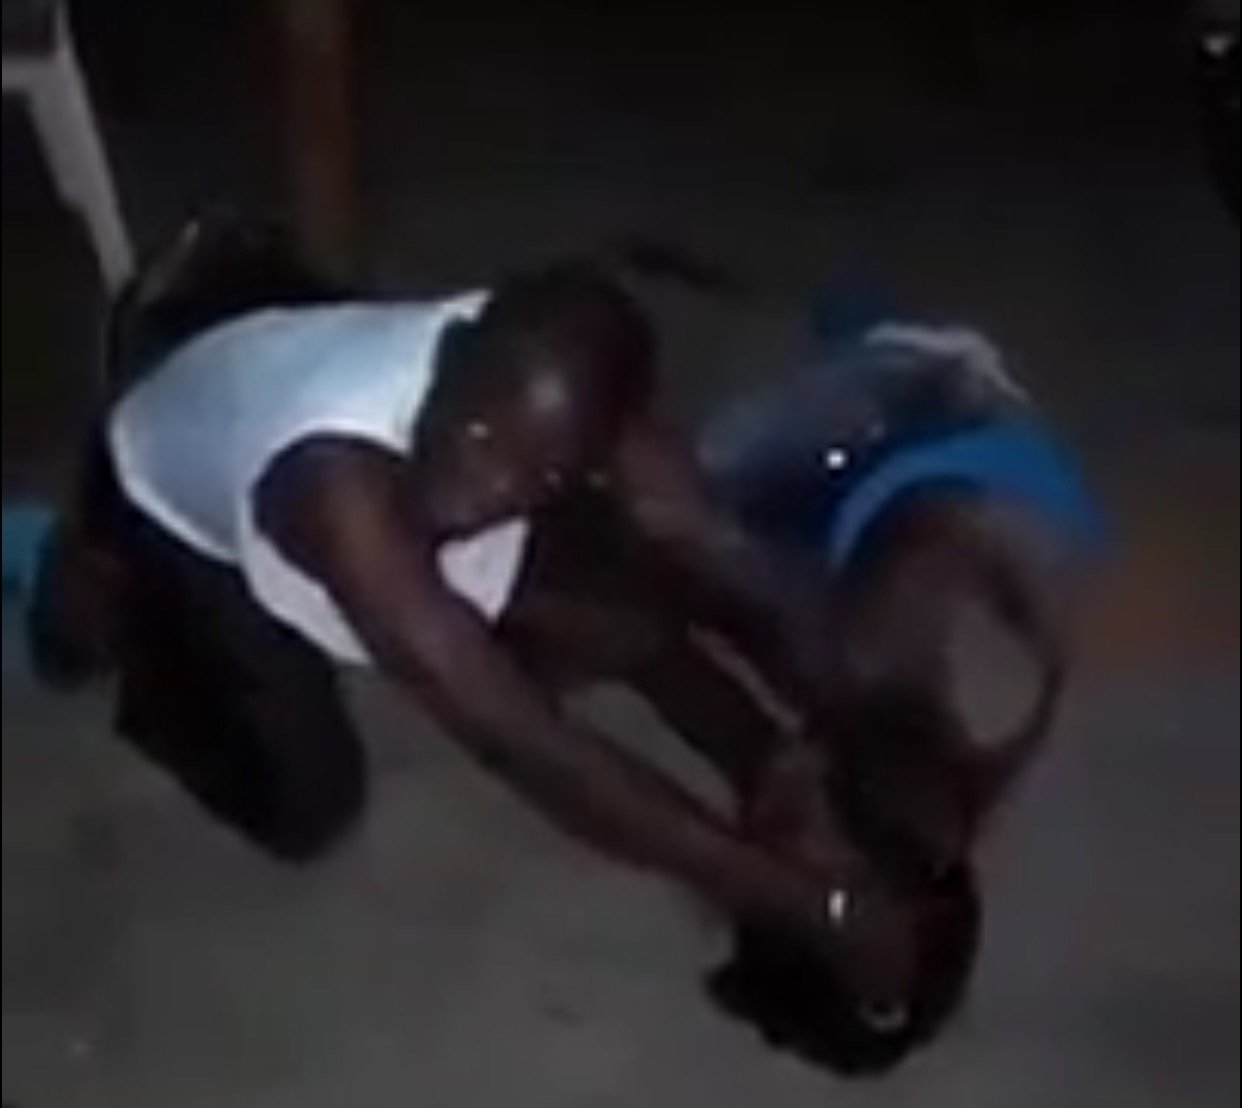 Luhya man beats woman senselessly after she grabbed his manhood in local pub in Nairobi (video)